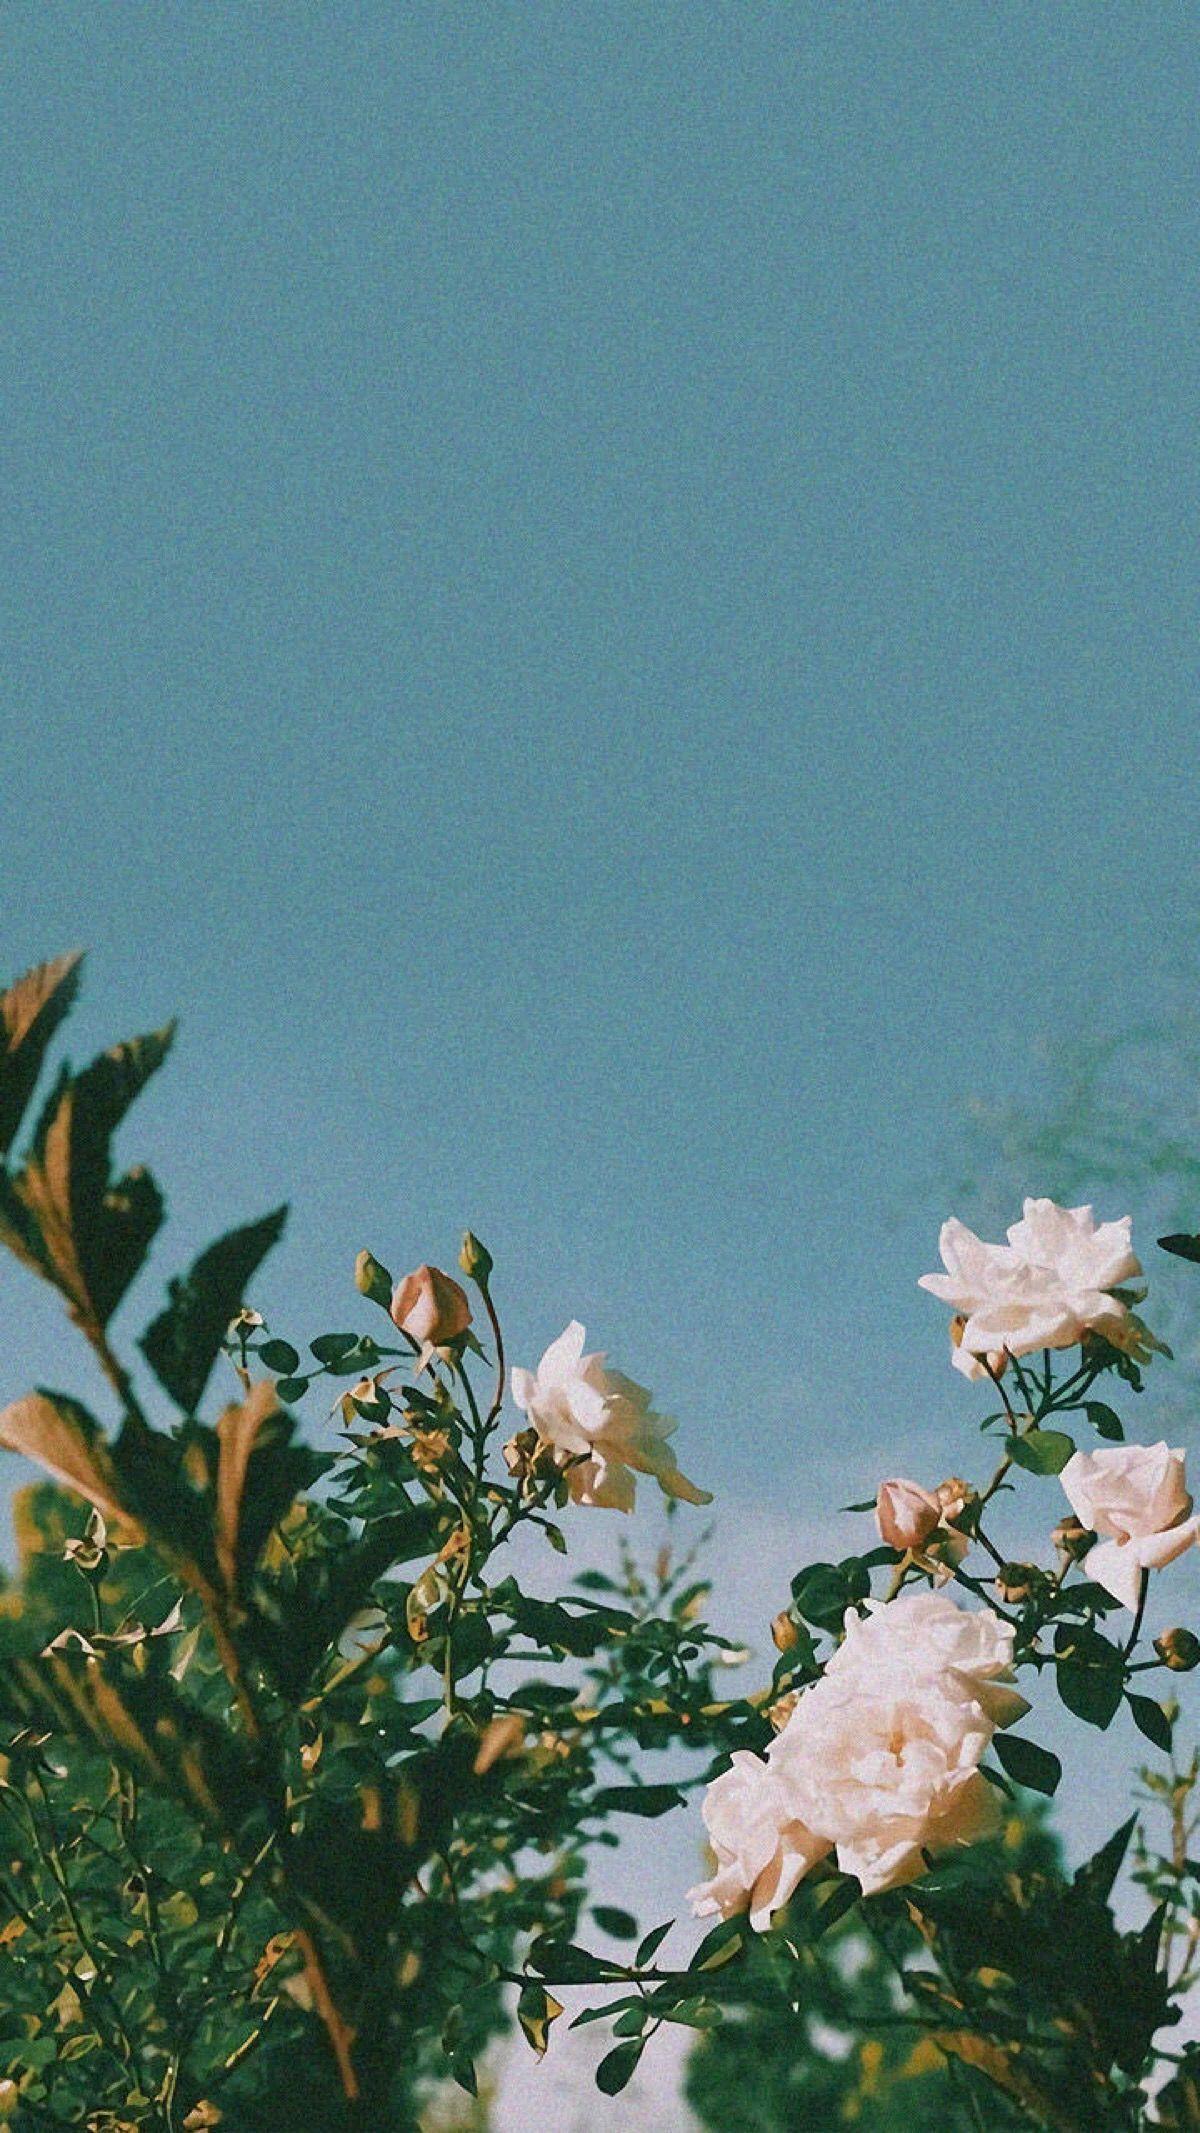 IPhone wallpaper of a blue sky and white flowers - Plants